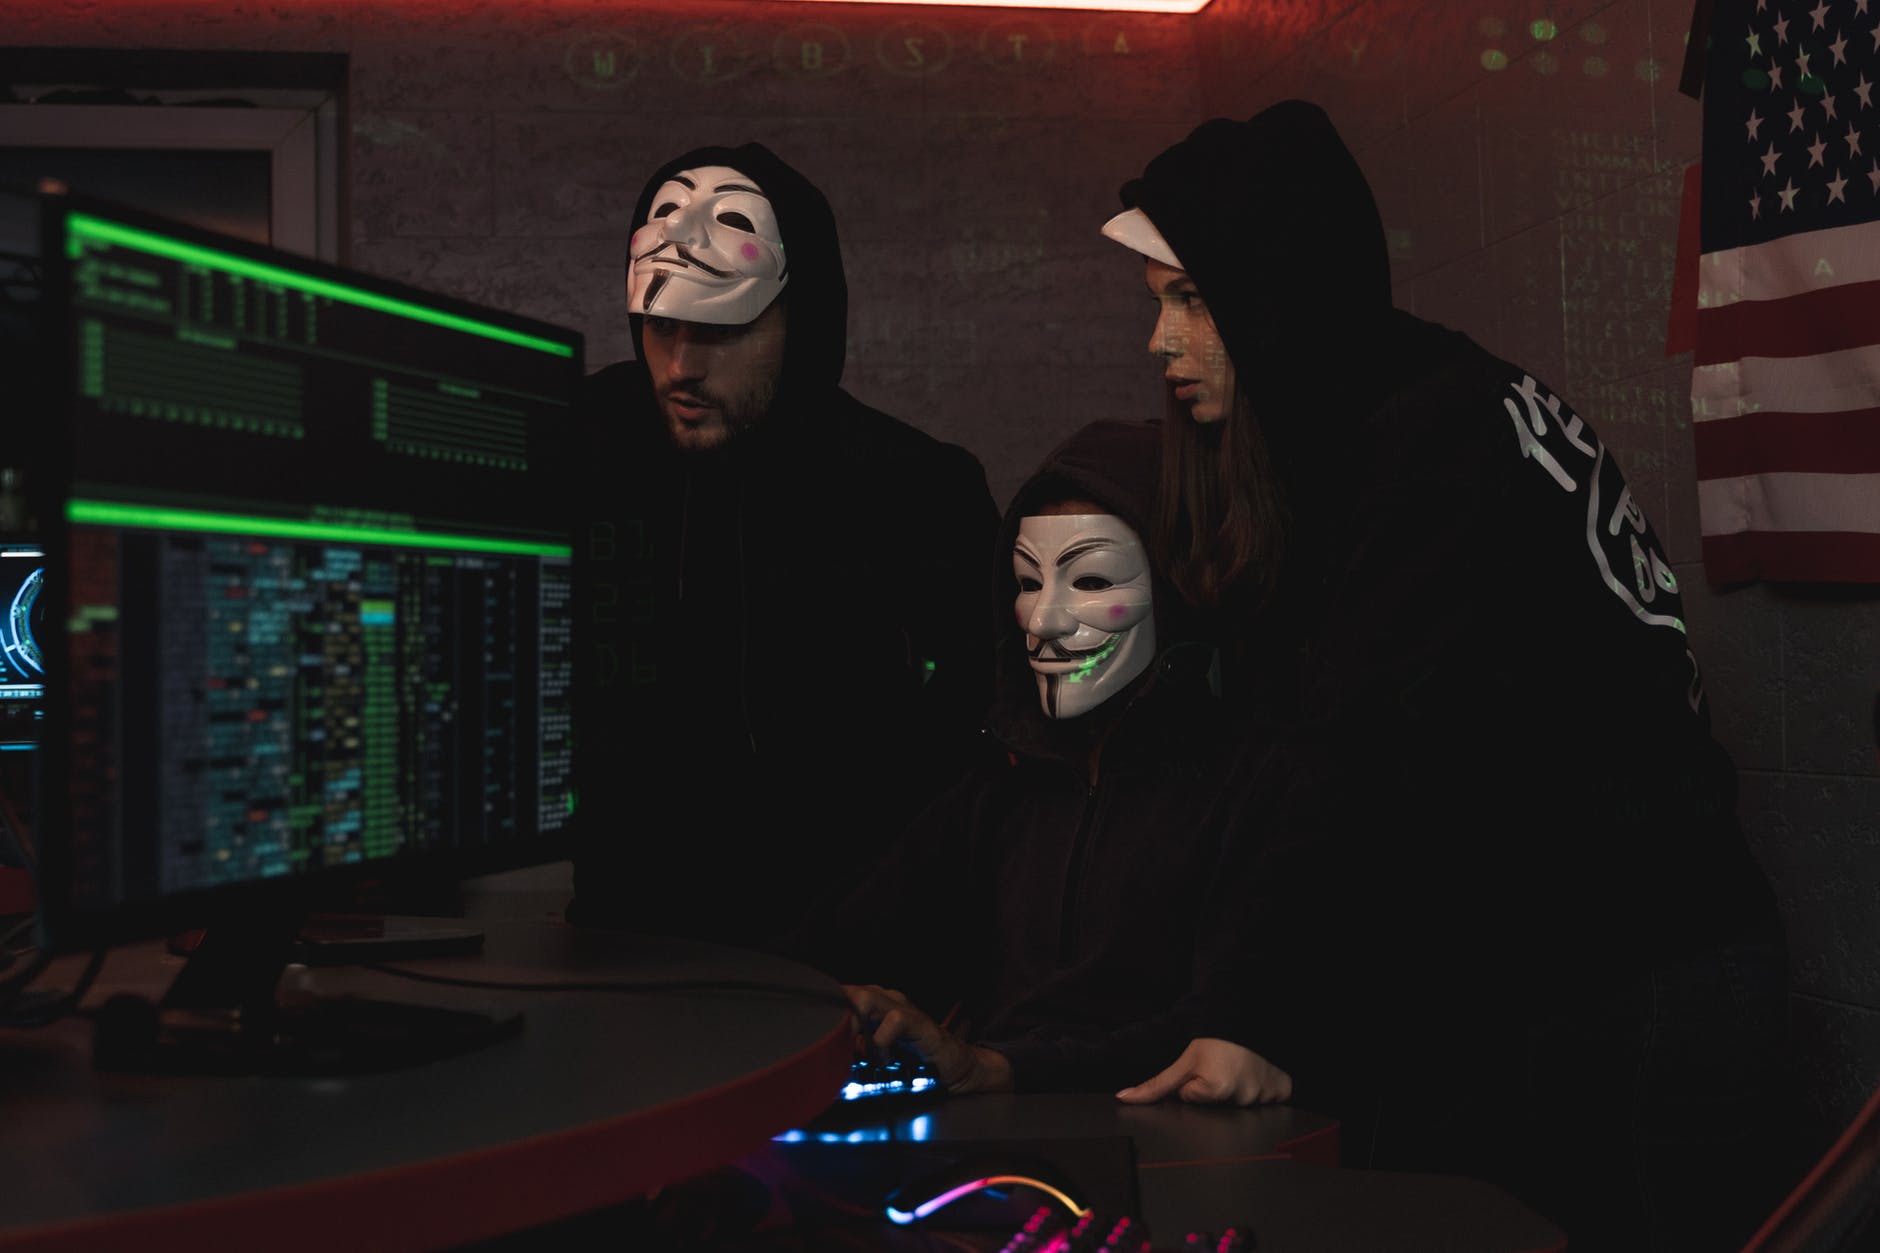 three people hacking a computer system